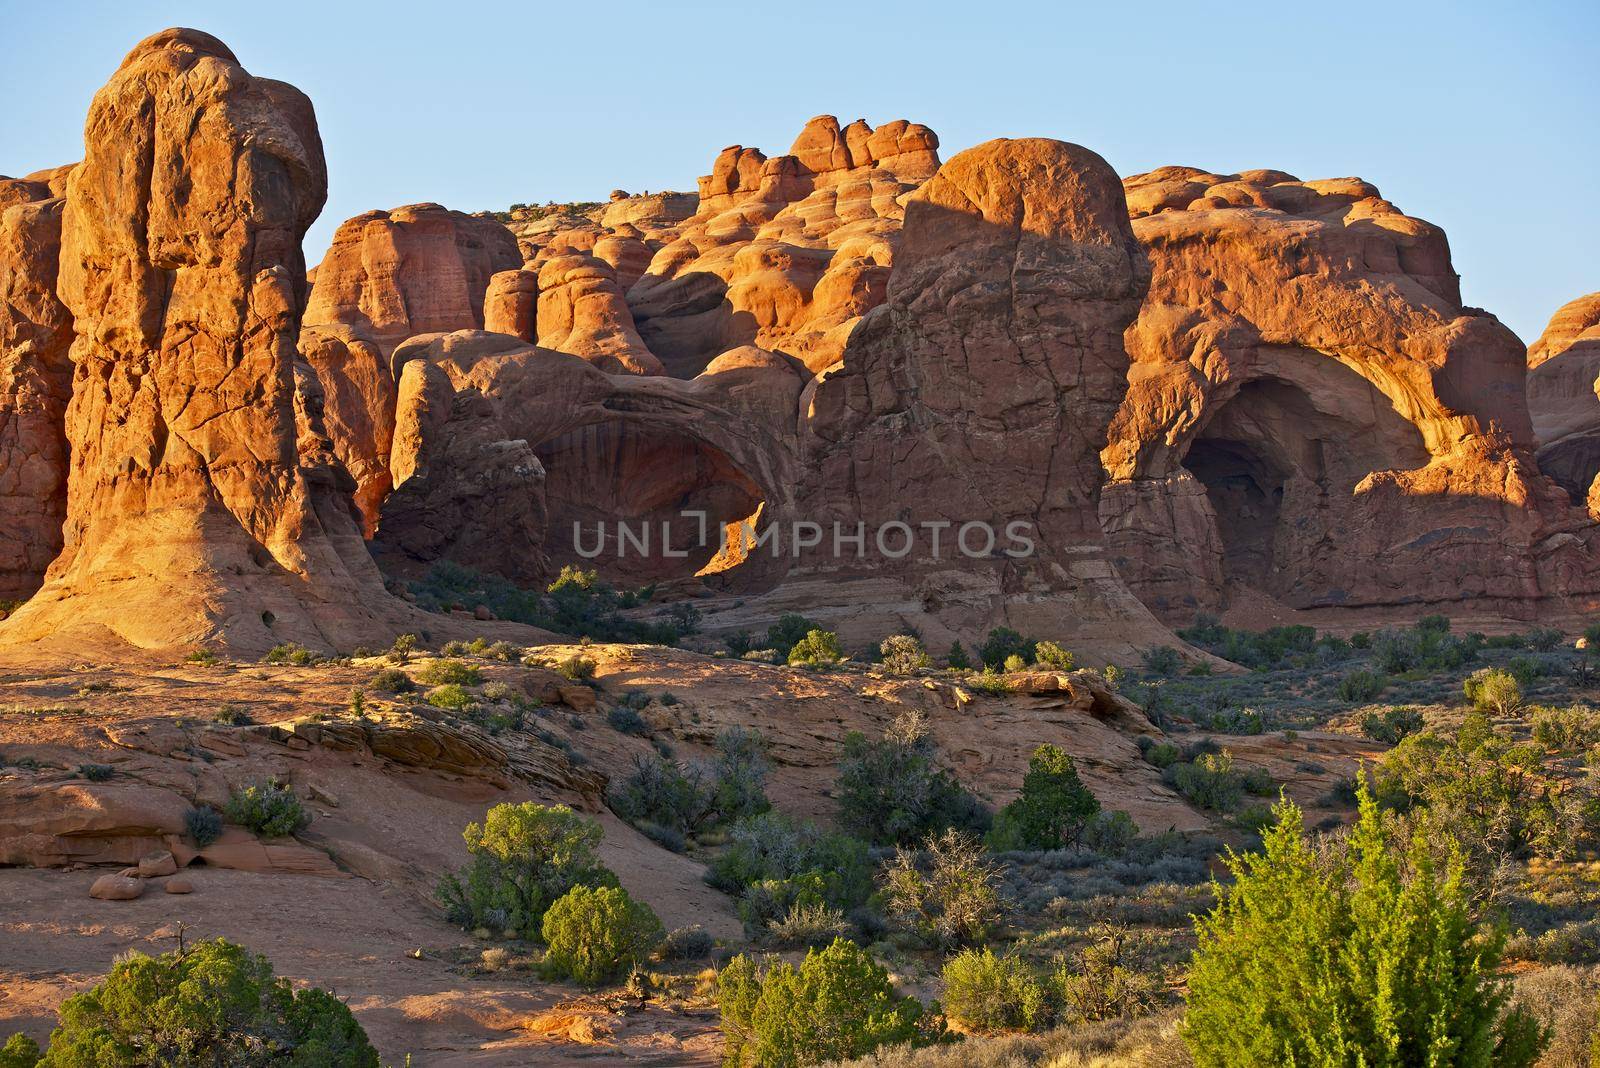 Arches National Park Utah, U.S.A. Arches Park Amazing Rocky Landscape. Eroded Red Sandstones. Travel Photo Collection